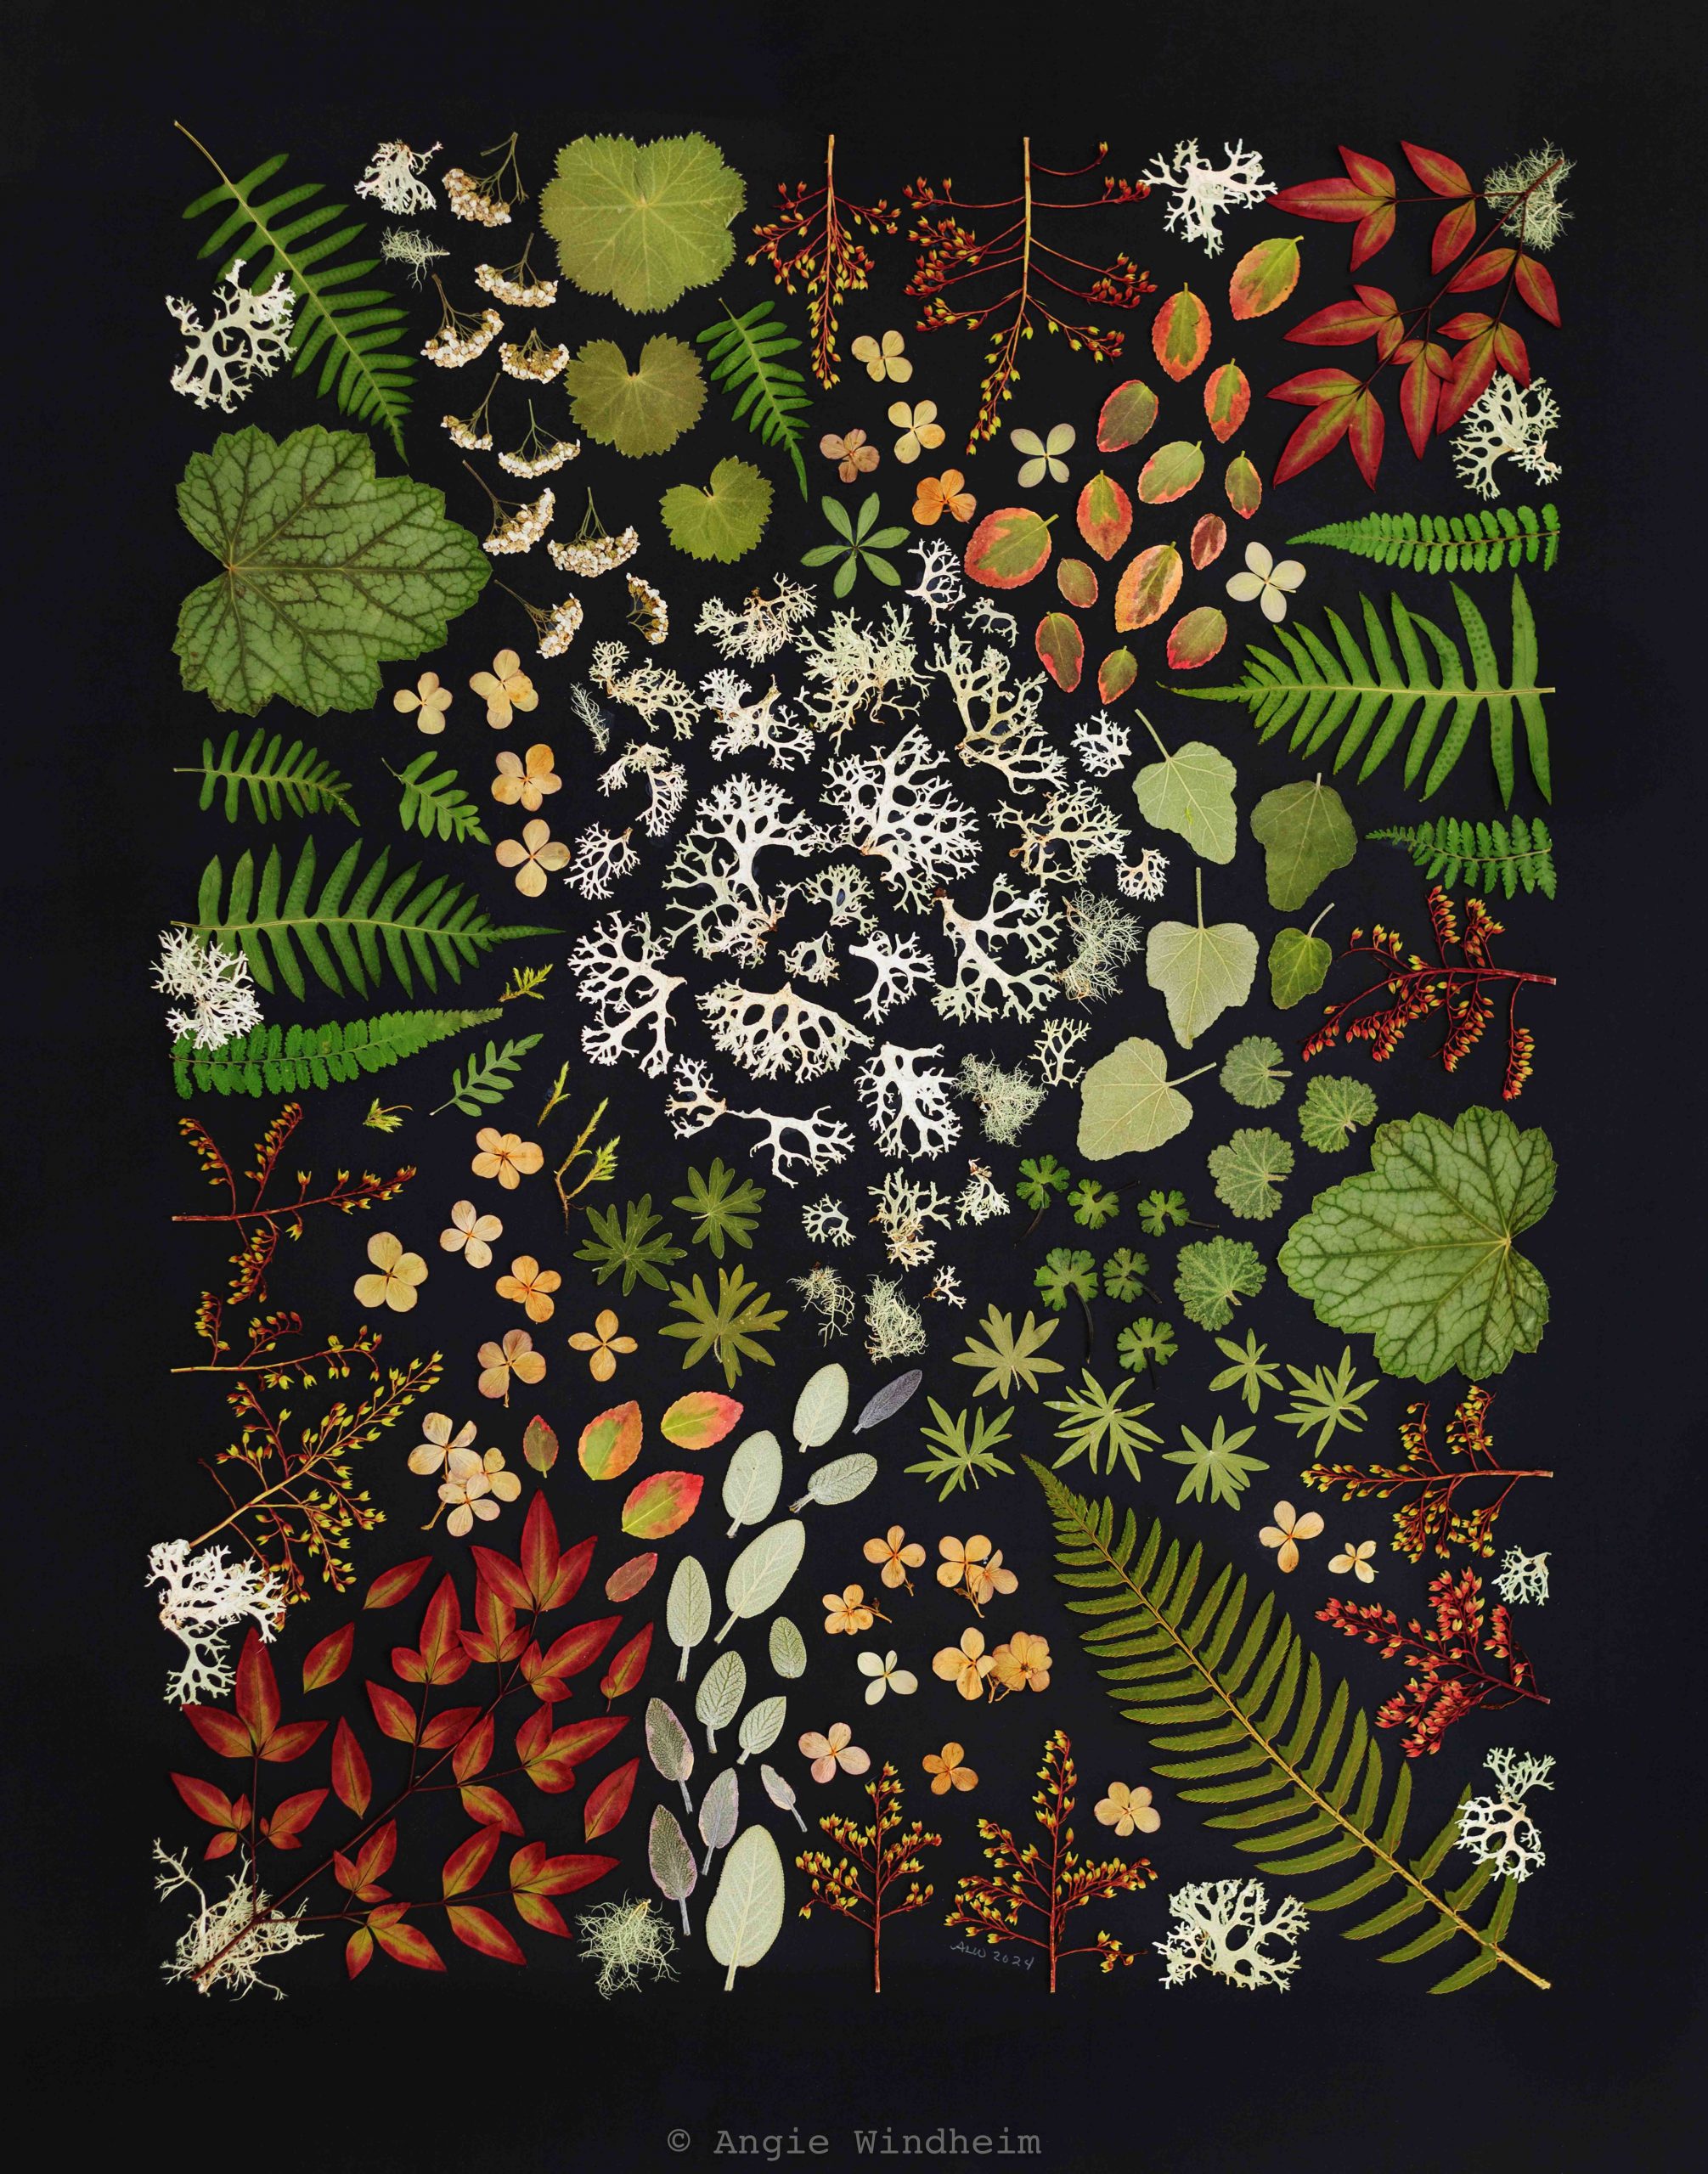 Photograph of pressed flowers and foliage arranged on paper to look like a coming together of all kinds as lichen is the symbol of connection. 